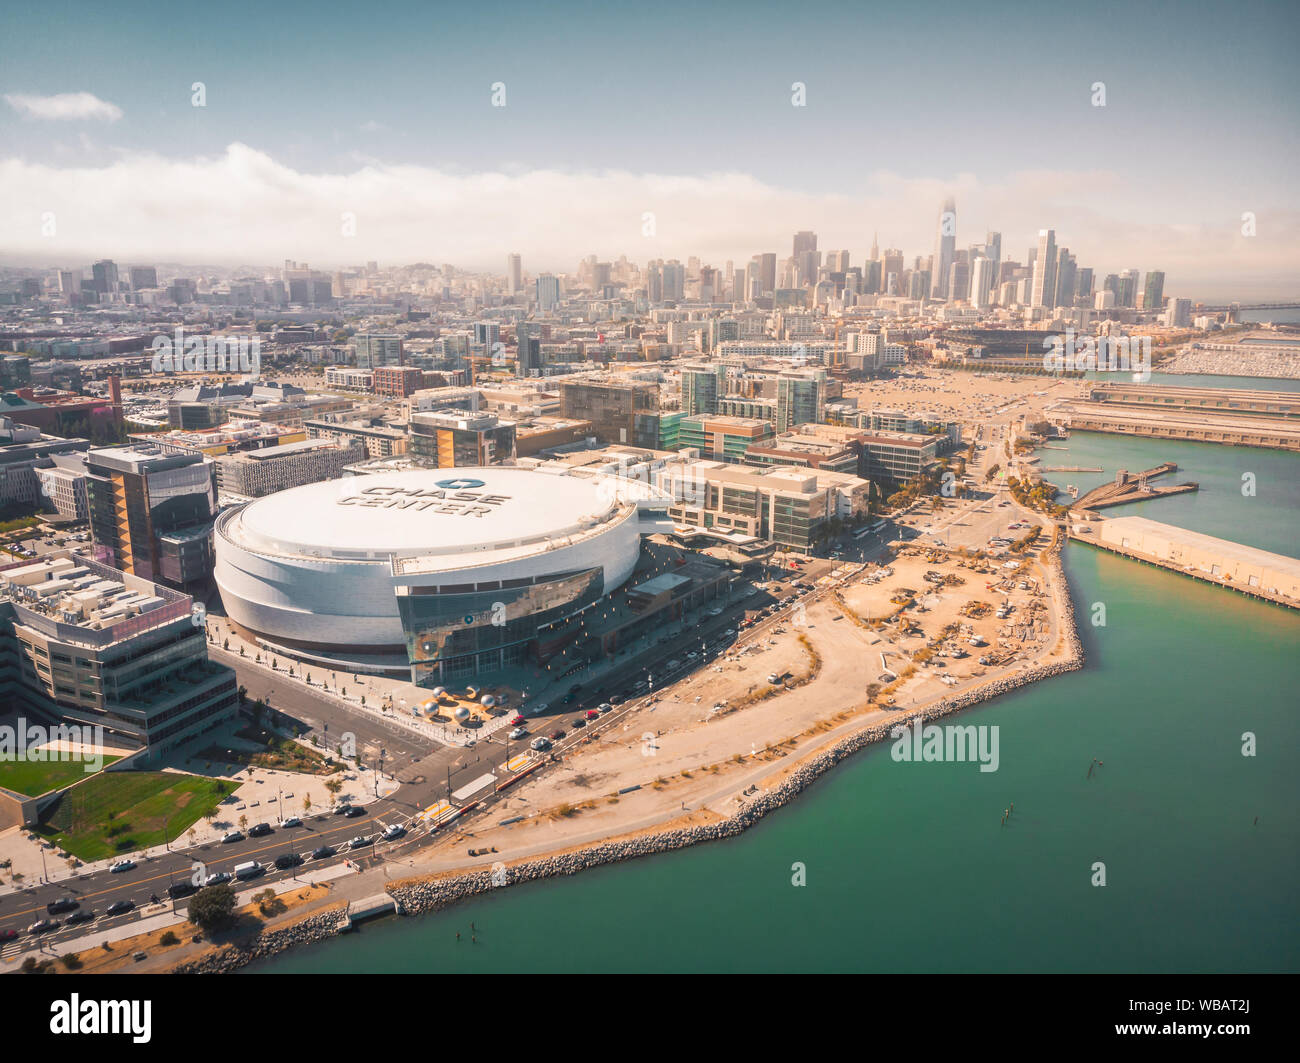 San Francisco, California / USA - August 23, 2019: Aerial View of the Chase Center Warriors Arena and the San Francisco Skyline Stock Photo